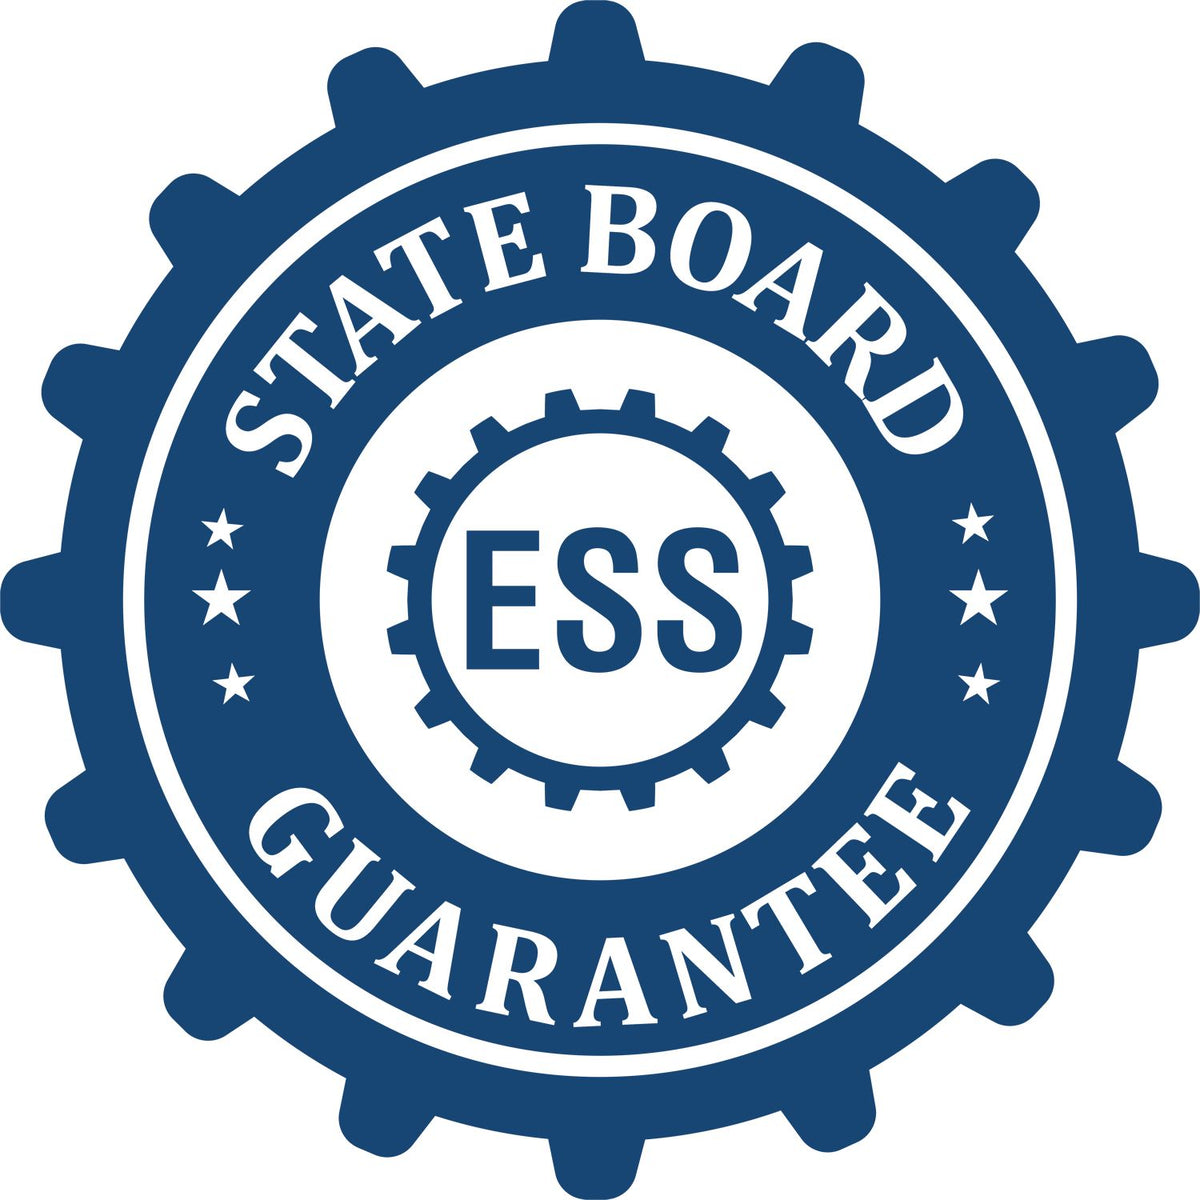 An emblem in a gear shape illustrating a state board guarantee for the Heavy Duty Cast Iron Kansas Architect Embosser product.